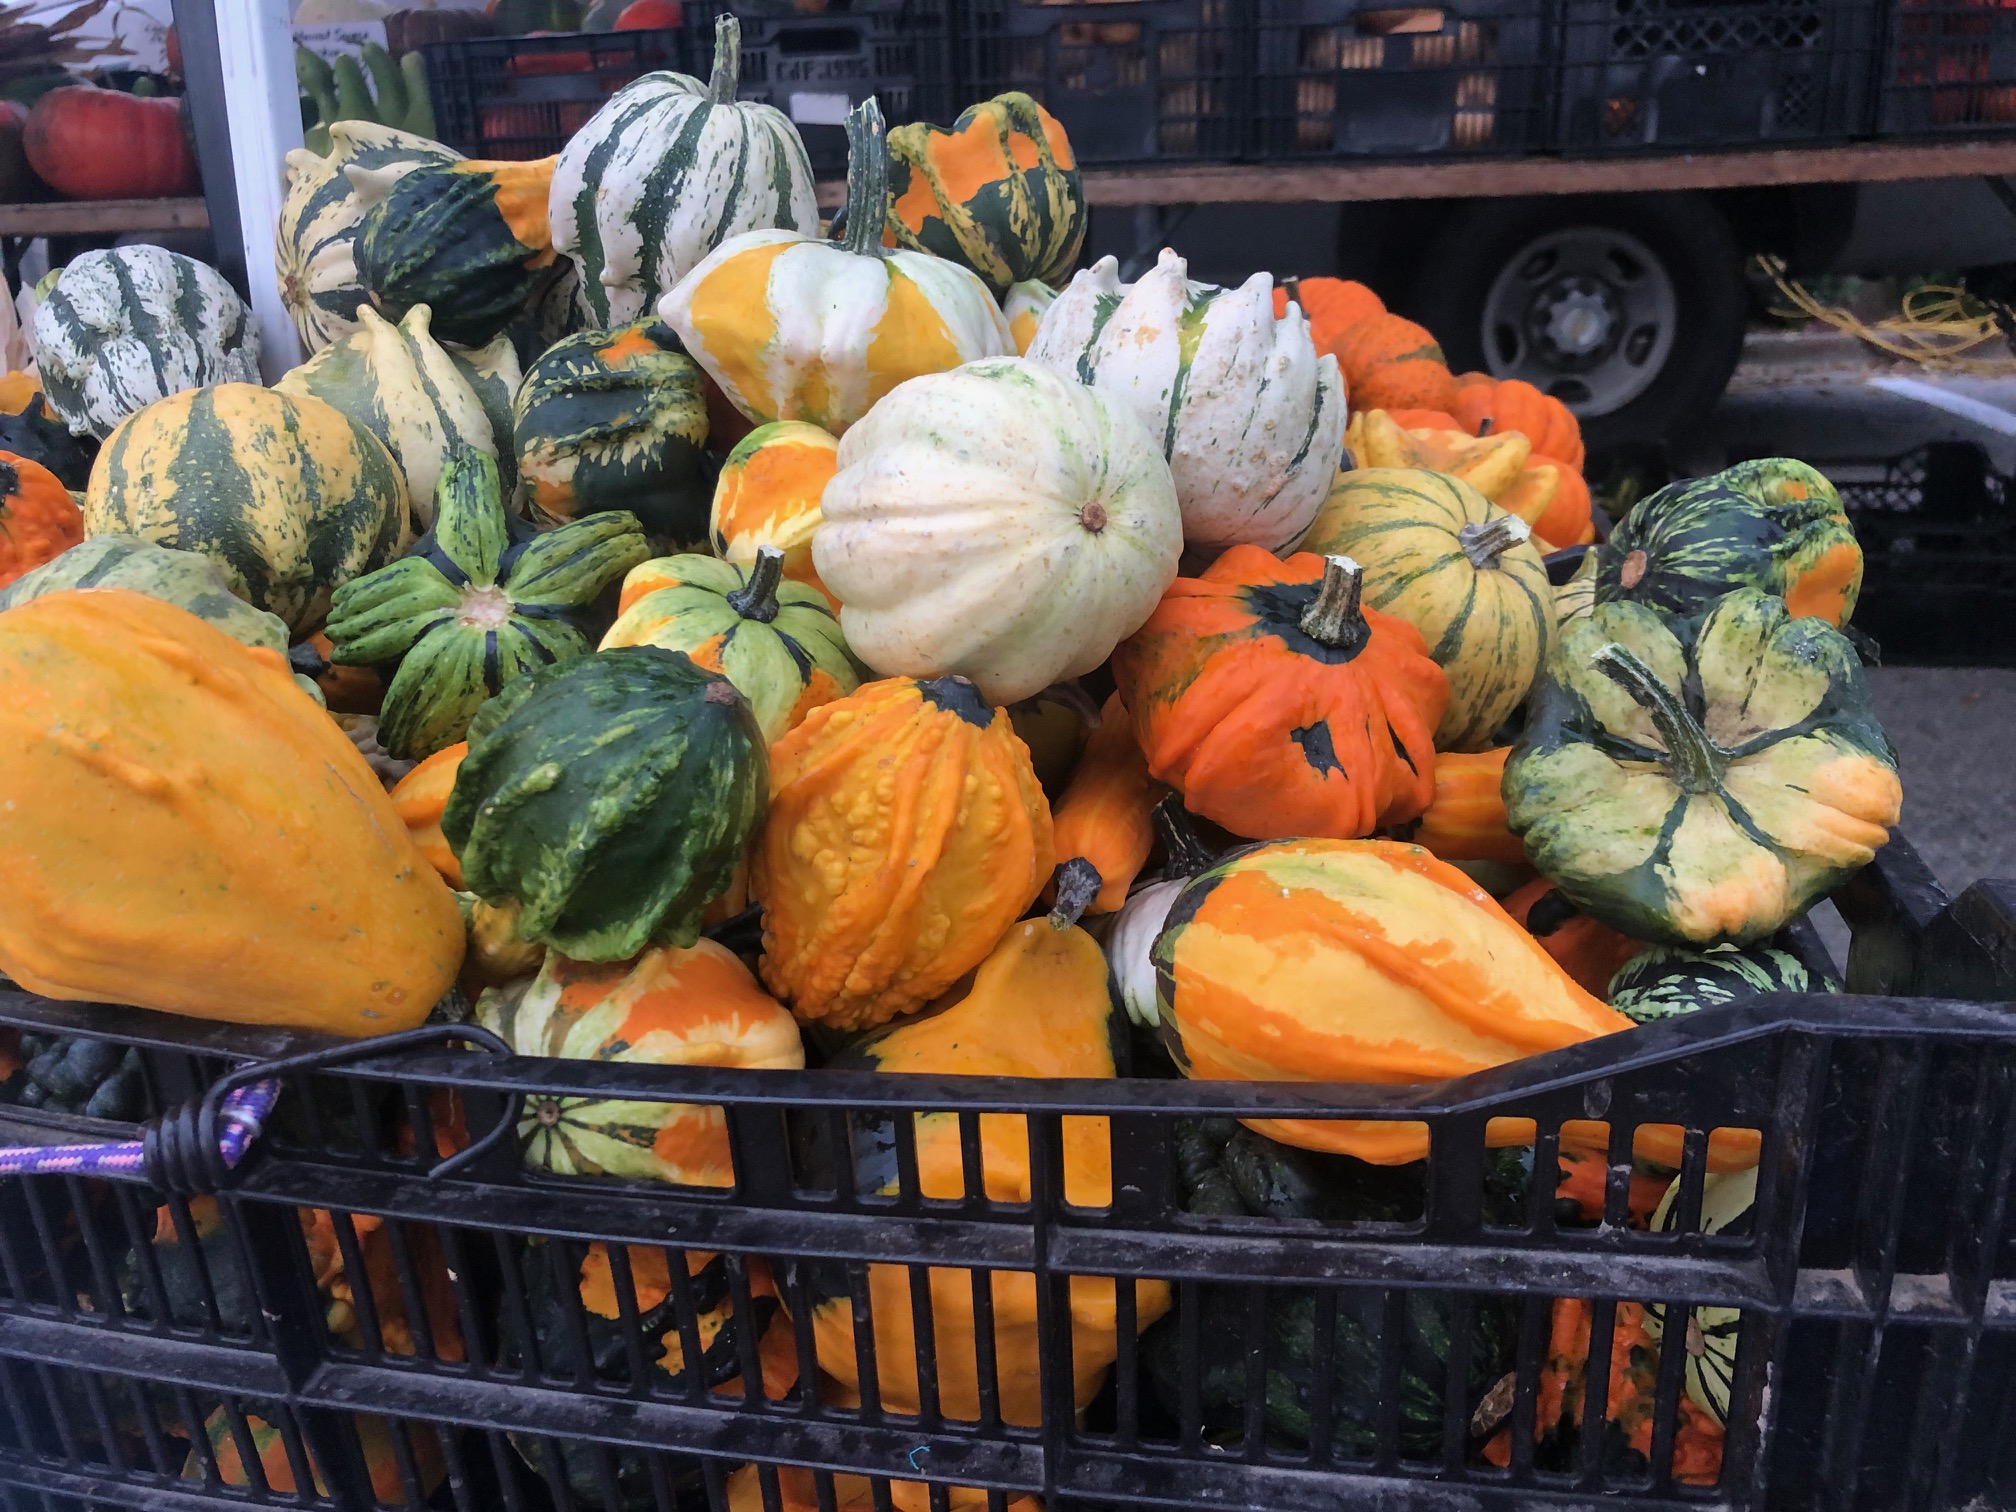 A black basket is overflowing with small pumpkins of orange, white, and green colors. Photo by Alyssa Buckley.